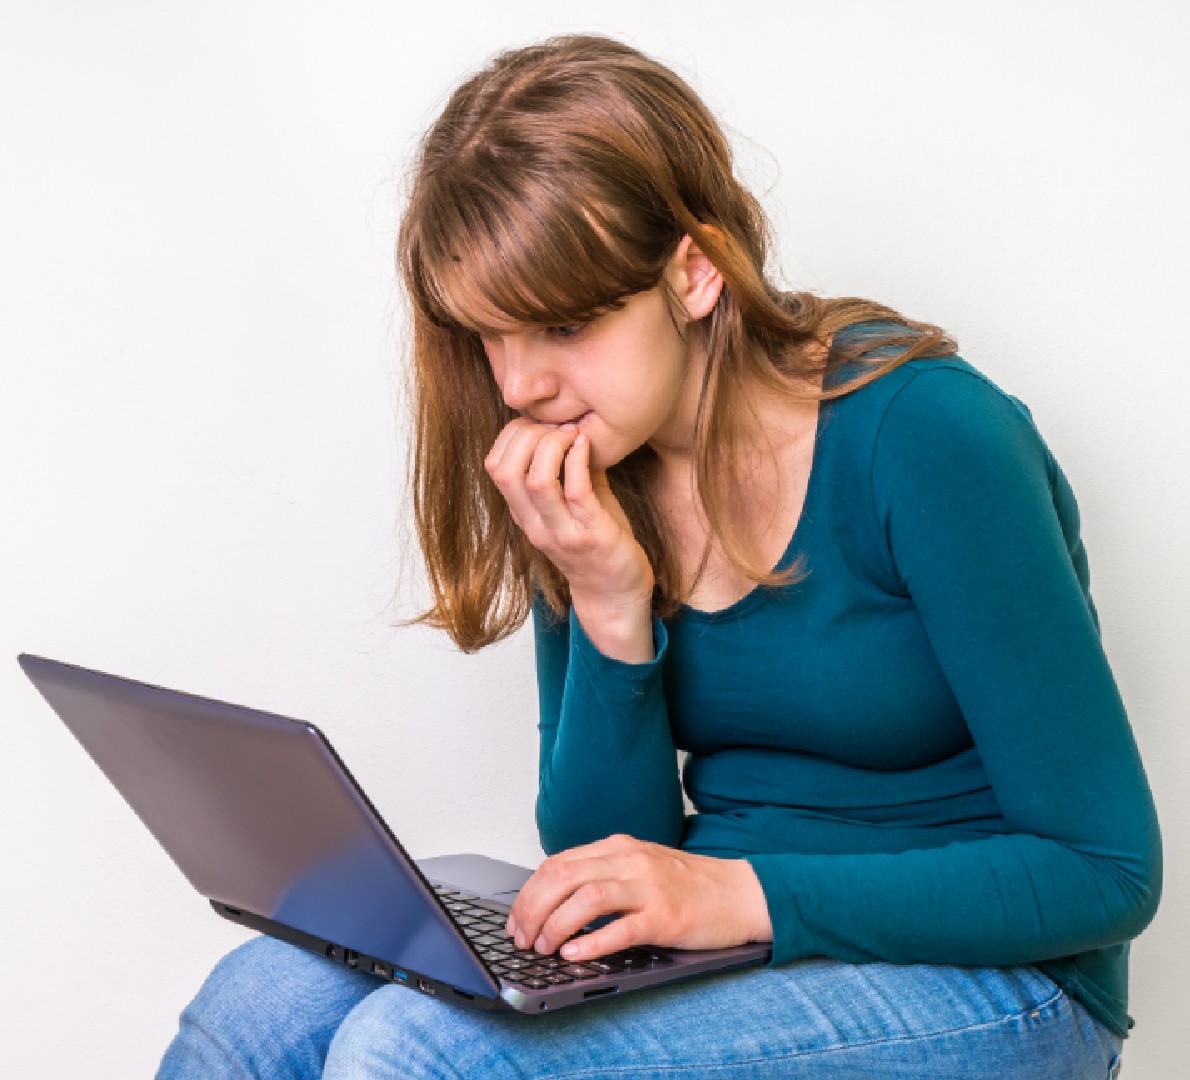 Woman slouched over laptop